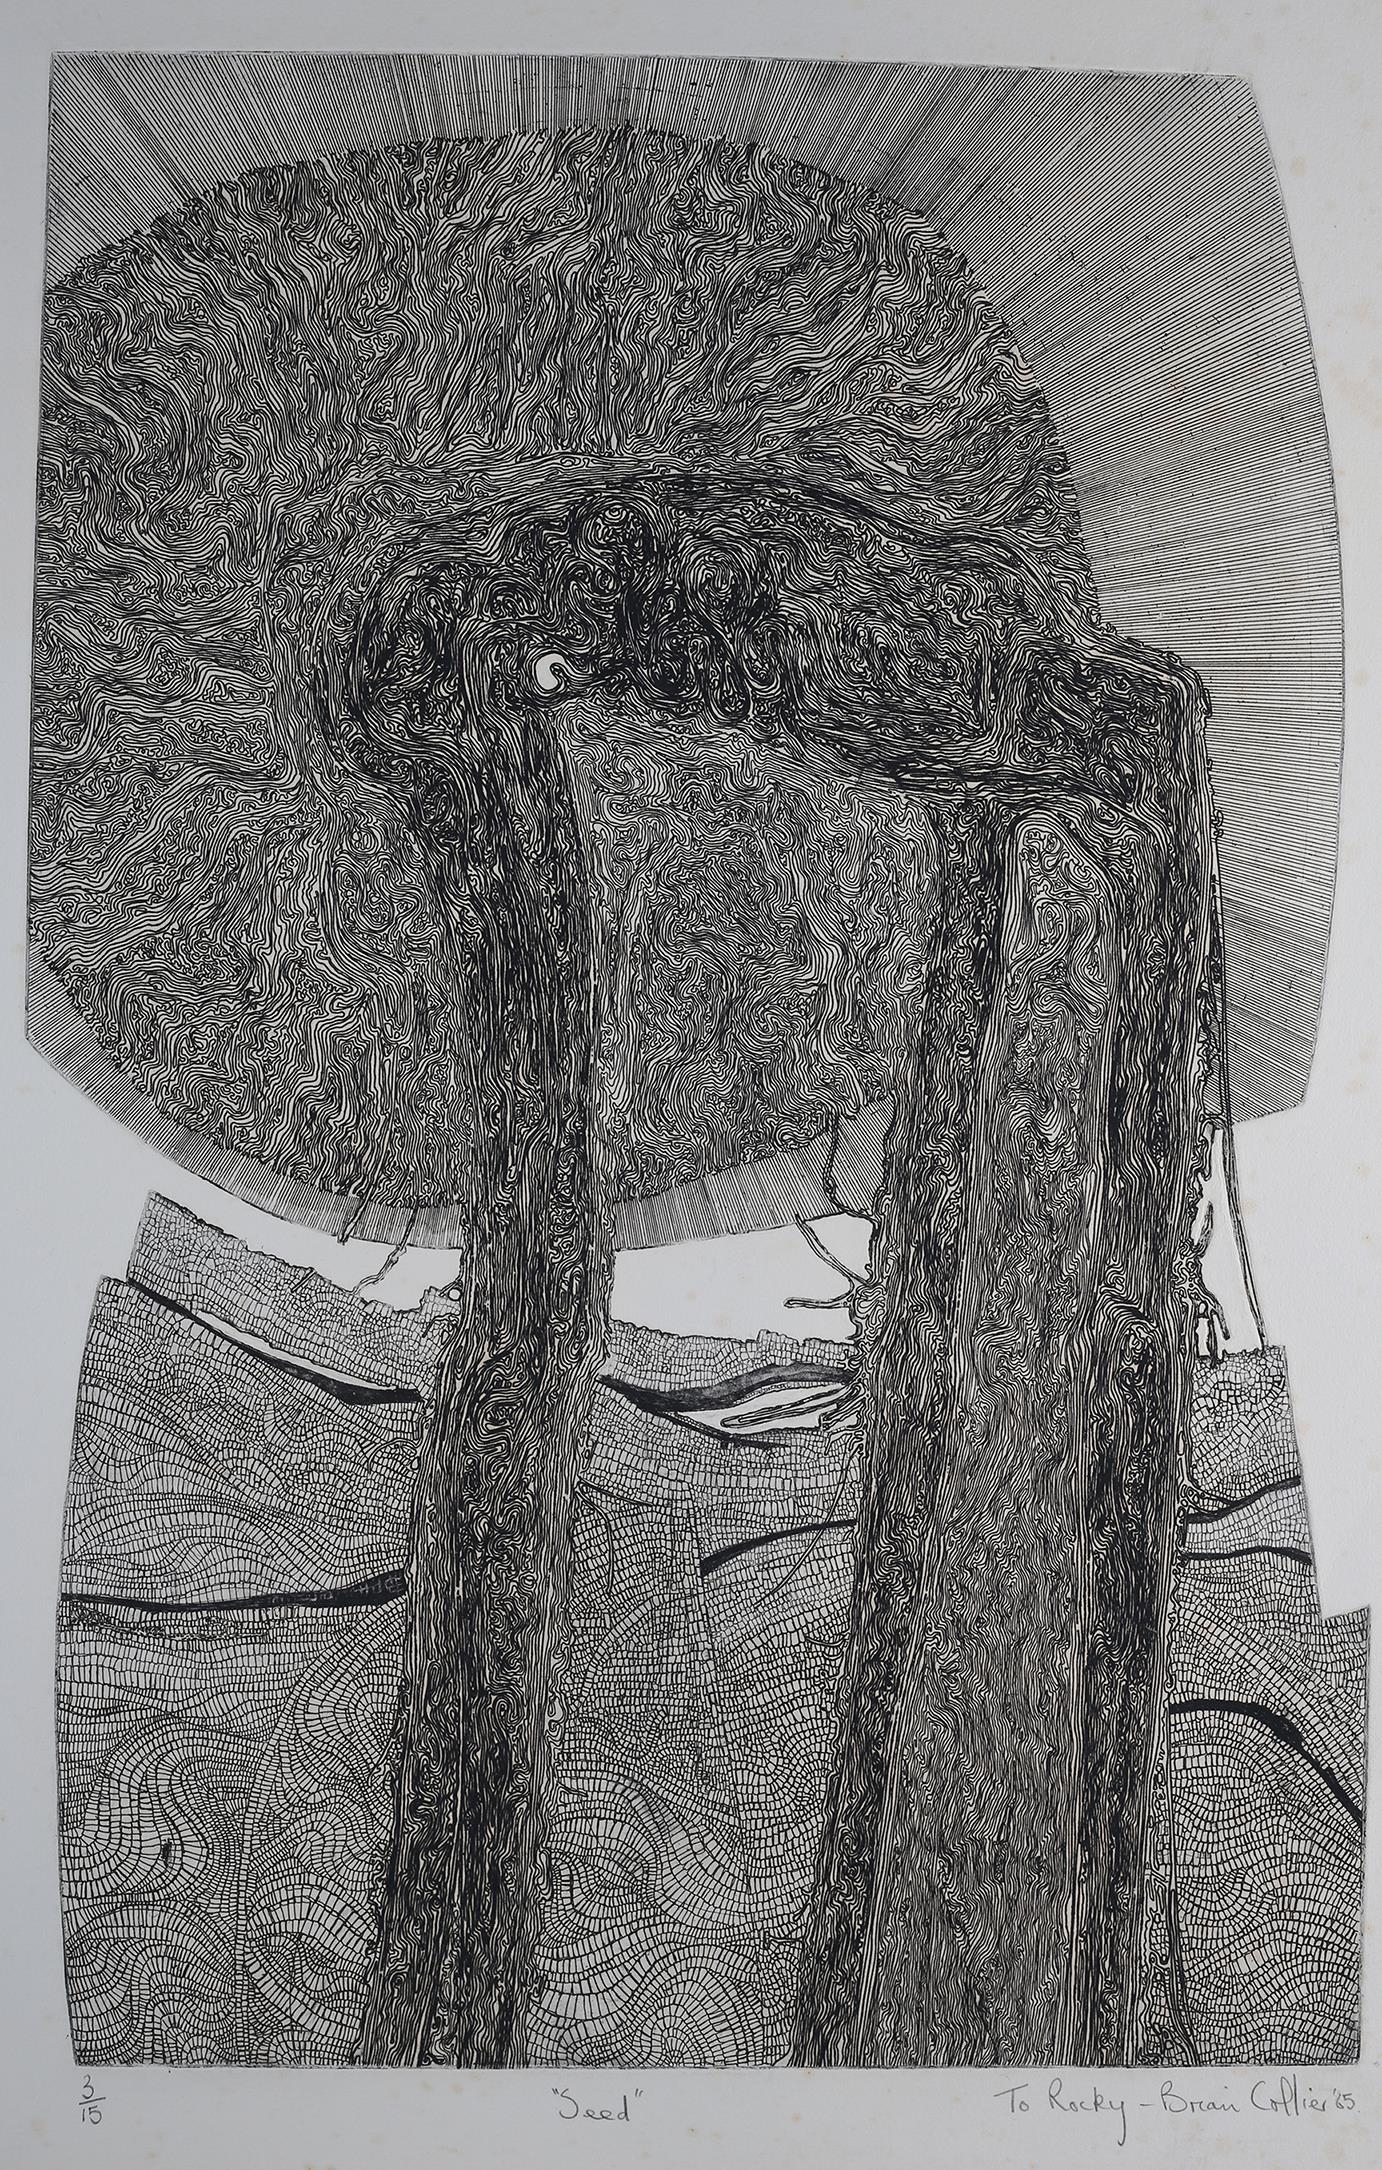 ARR By and after Brian Collier, 'Seed', black and white etching, 3/15, titled, signed and dated 1965